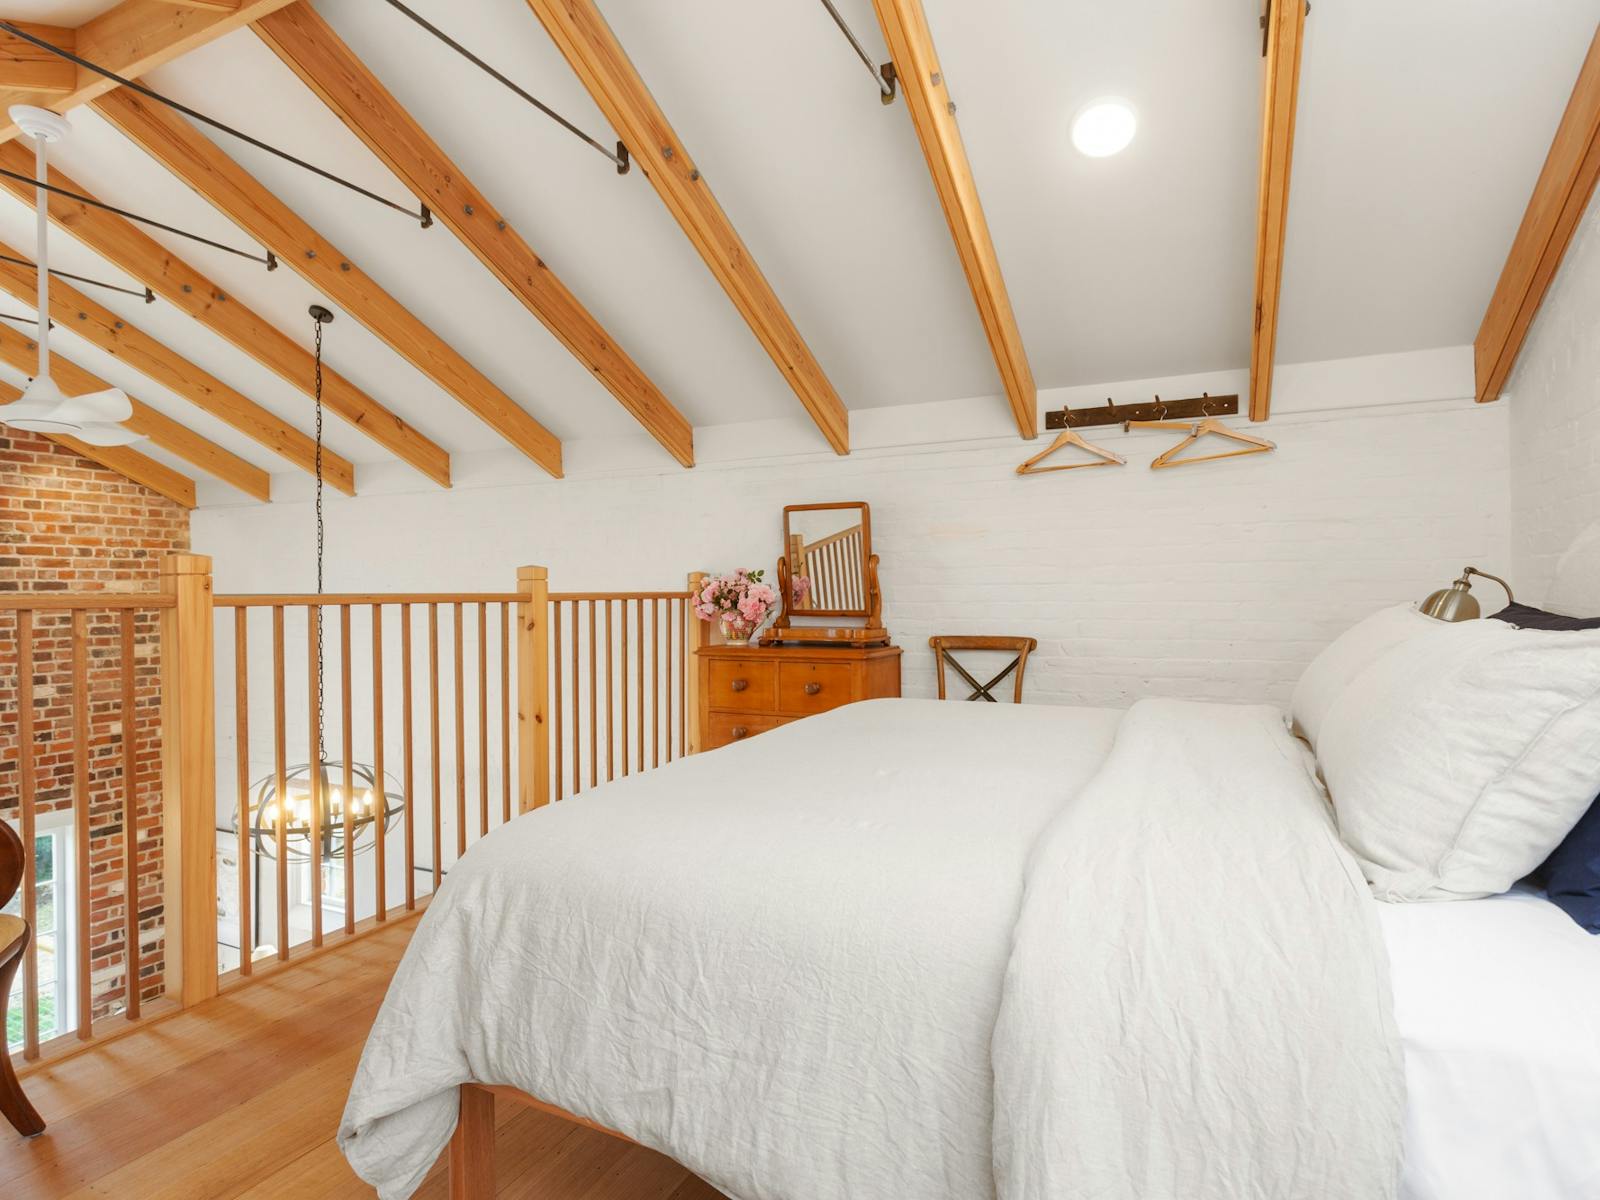 Loft bedroom with king bed, linen covers, wooden rails and ceiling